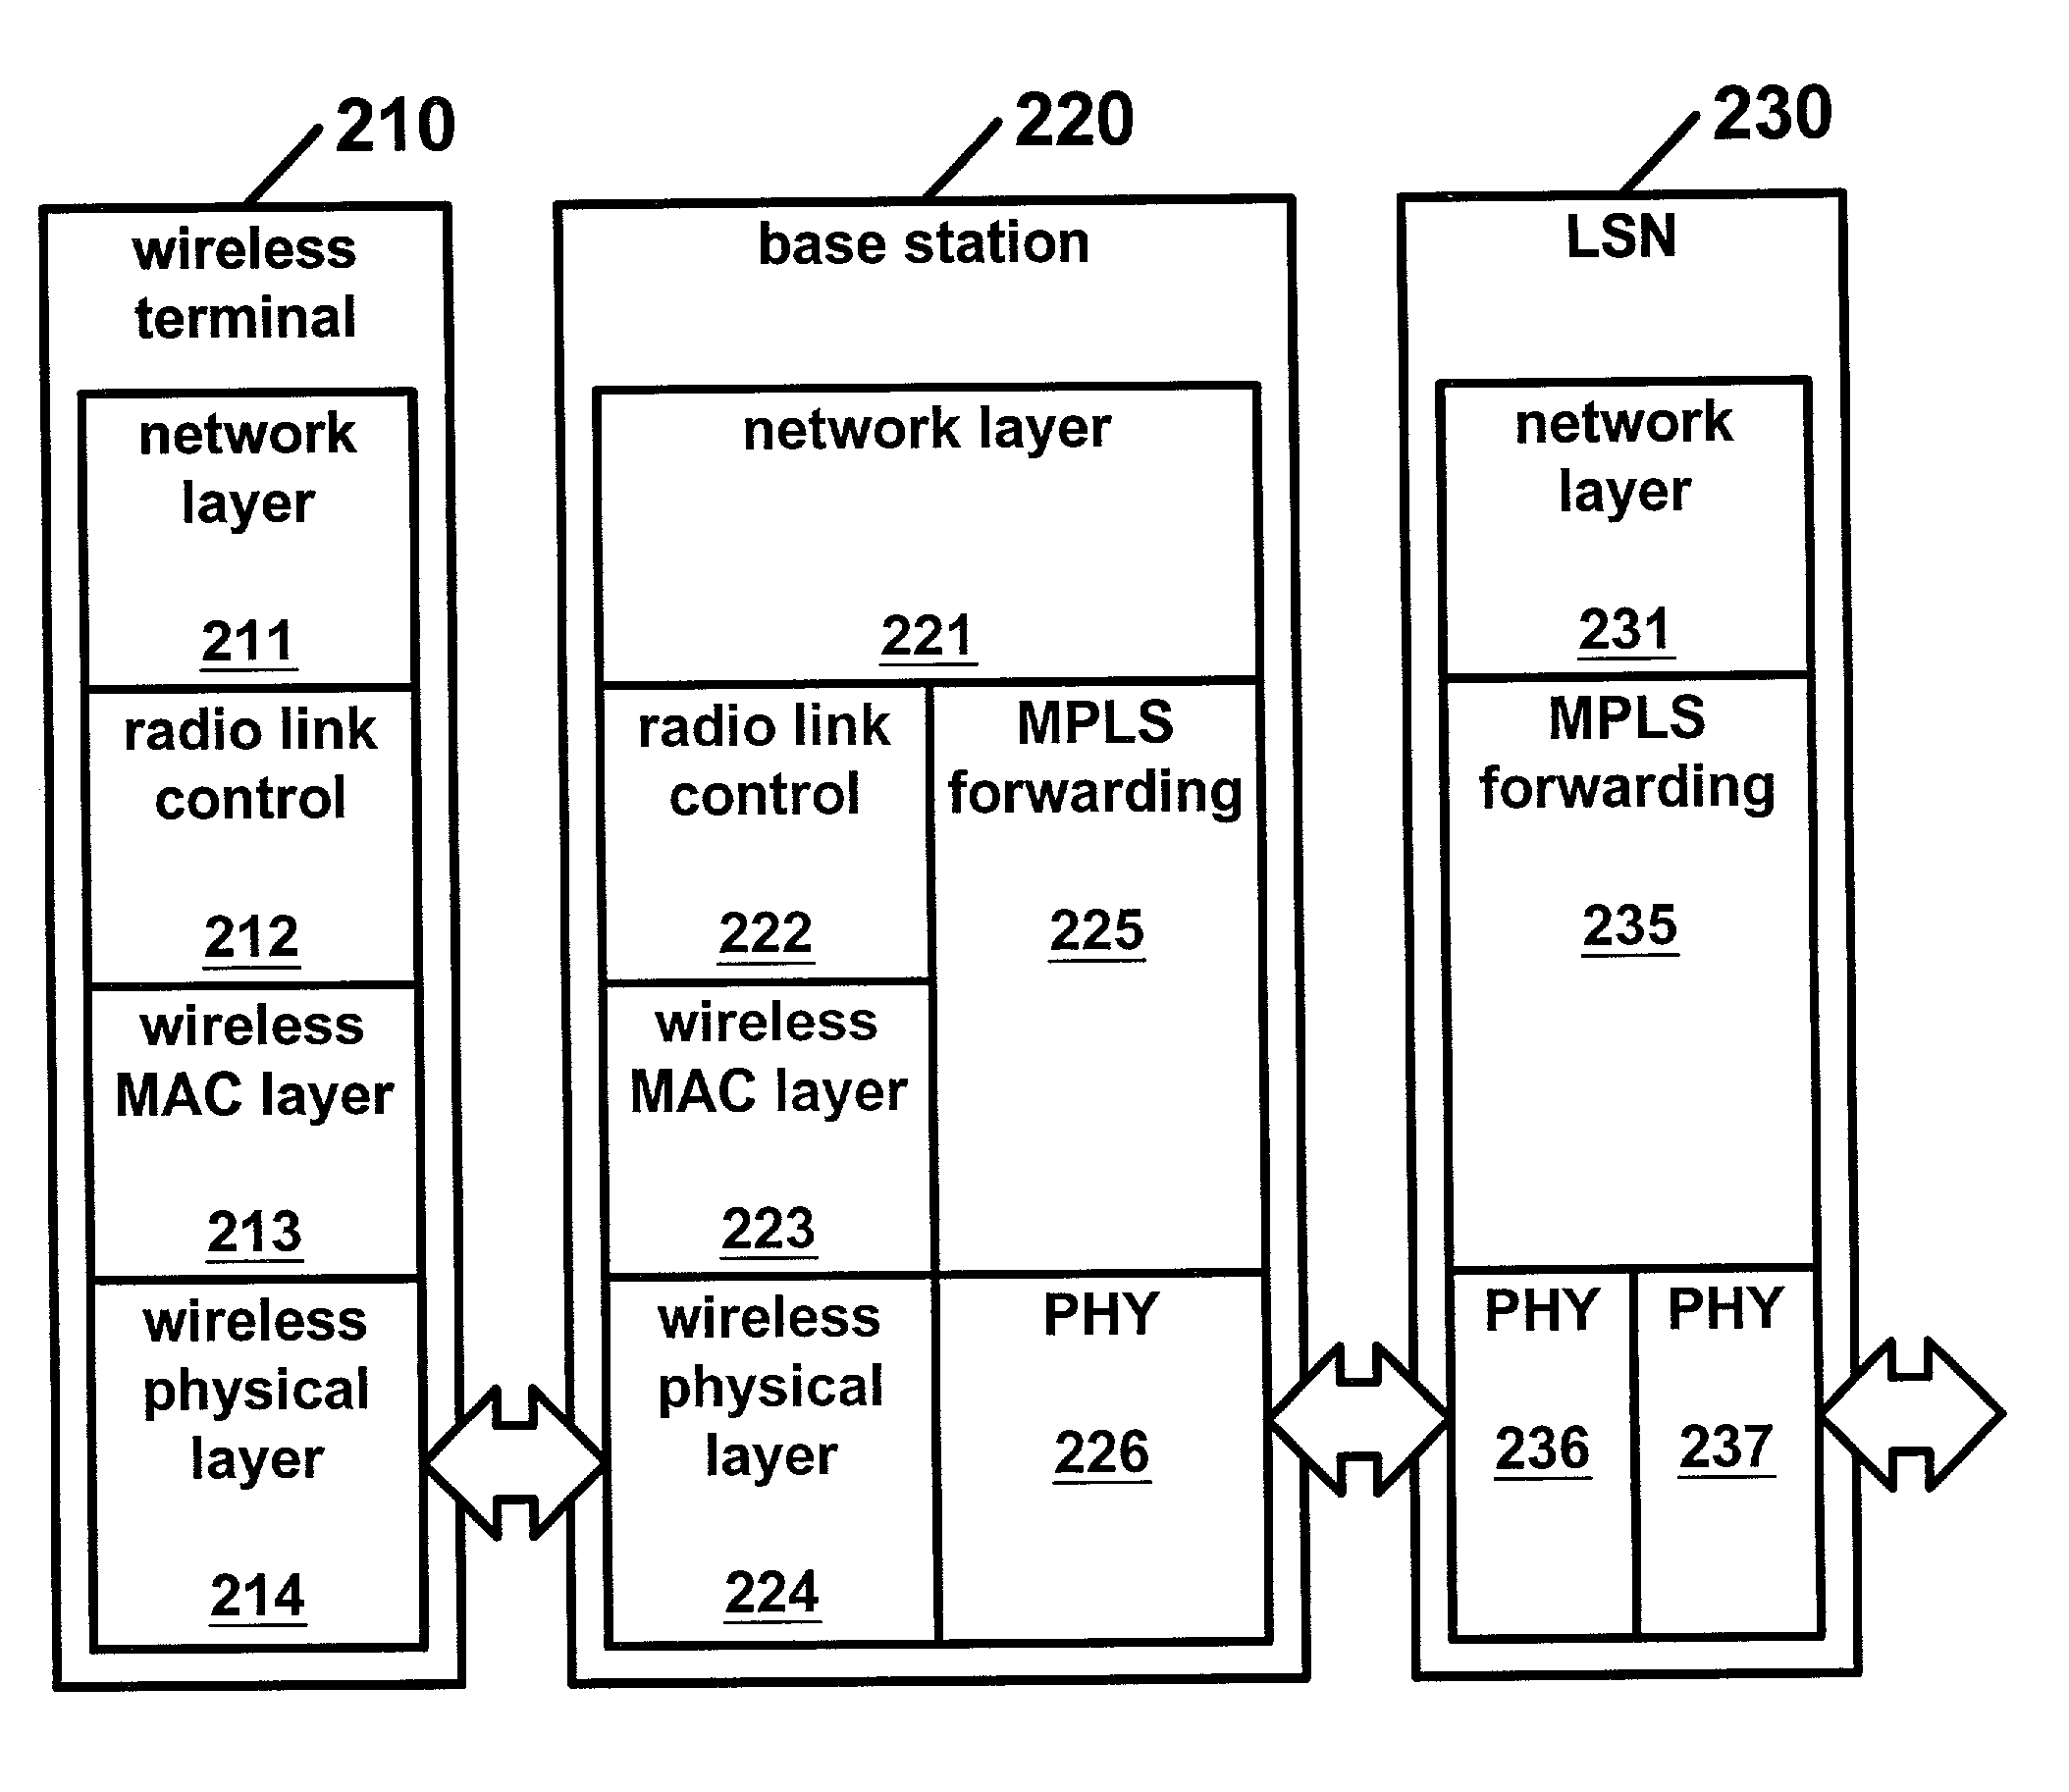 Wireless label switched packet transfer network